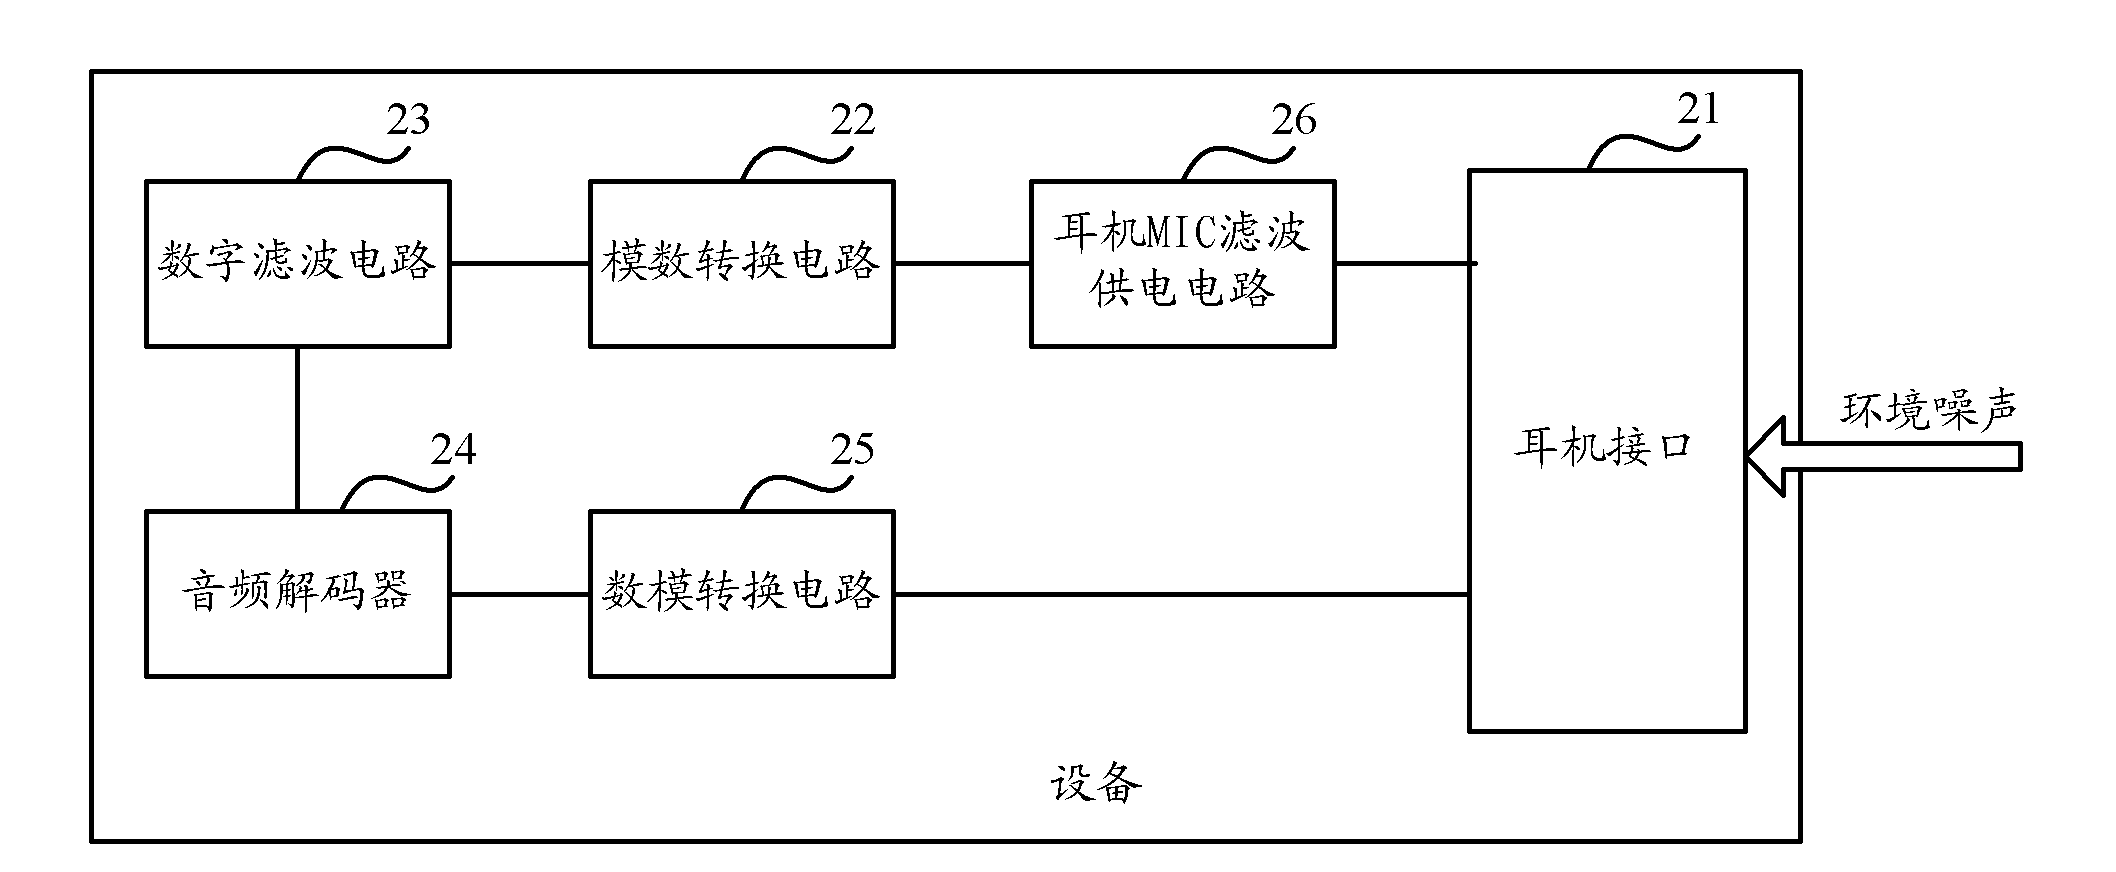 Method, equipment and system for reducing headset noise